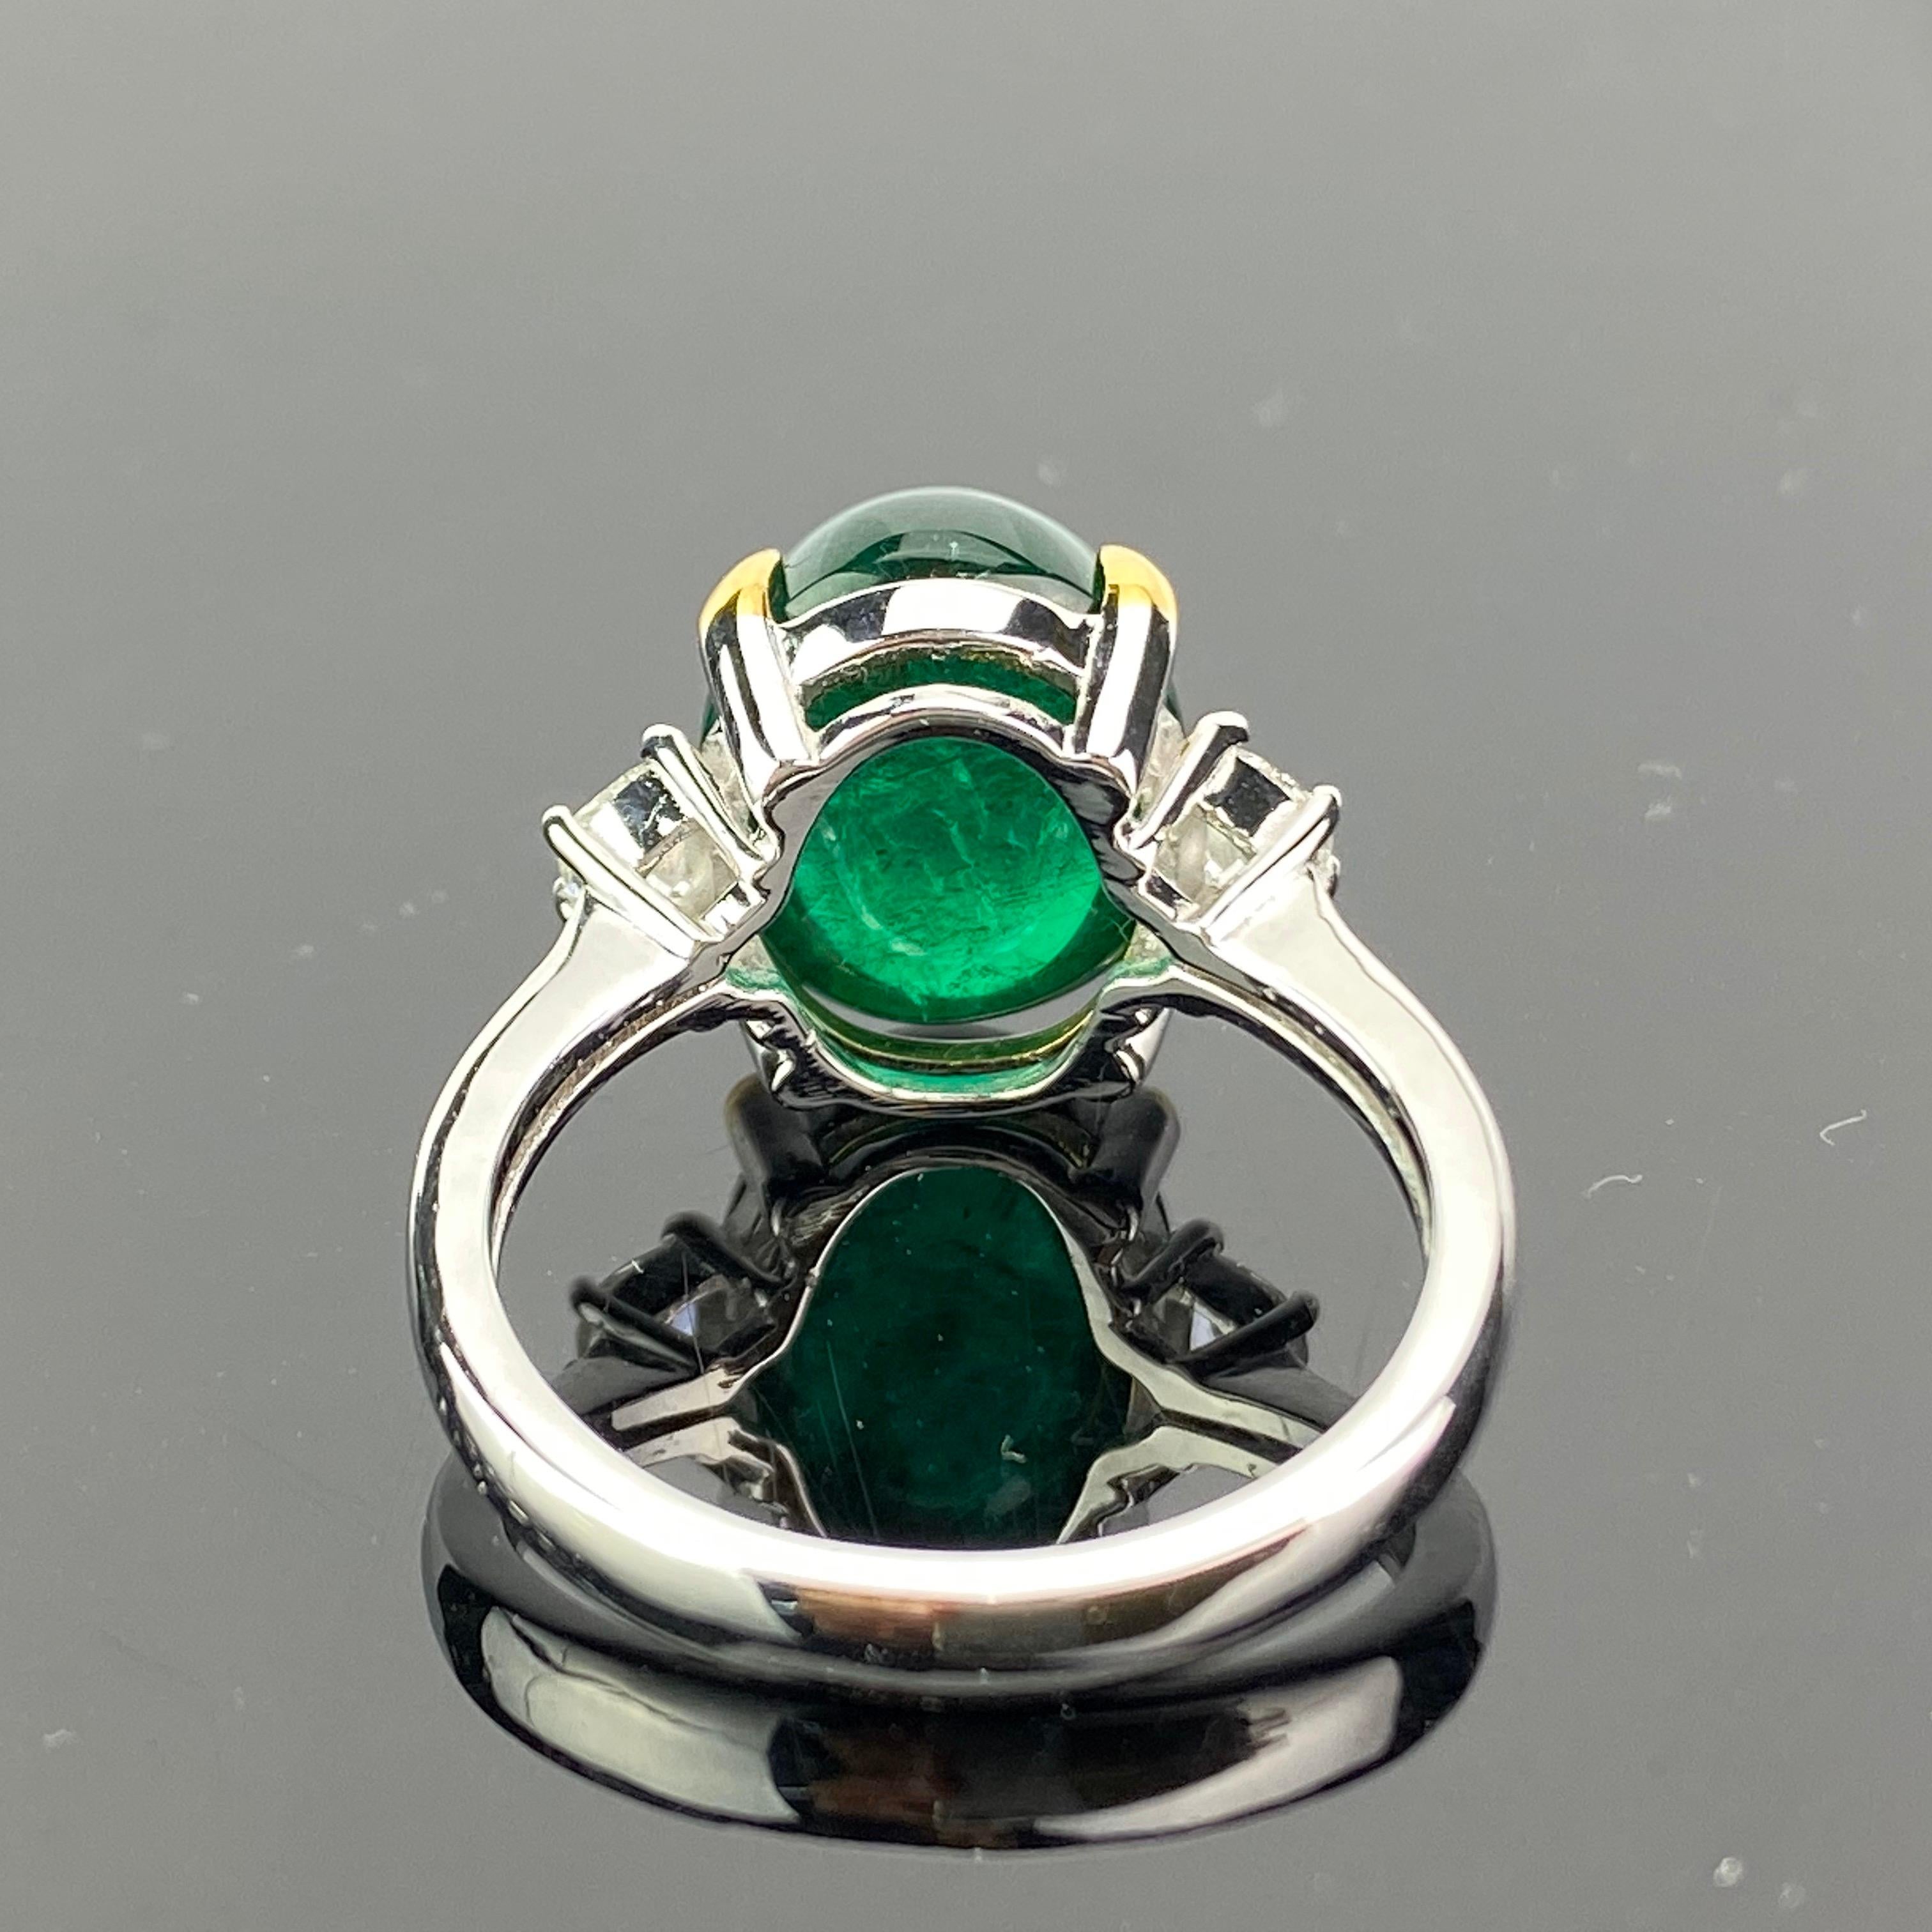 A beautiful three-stone engagement ring, with a 7.00 carat lustrous and transparent Zambian Emerald cabochon centre stone and 2 half-moon side stone diamonds; all set in 18K white gold. Currently a ring size US 6, but we can resize the ring for you